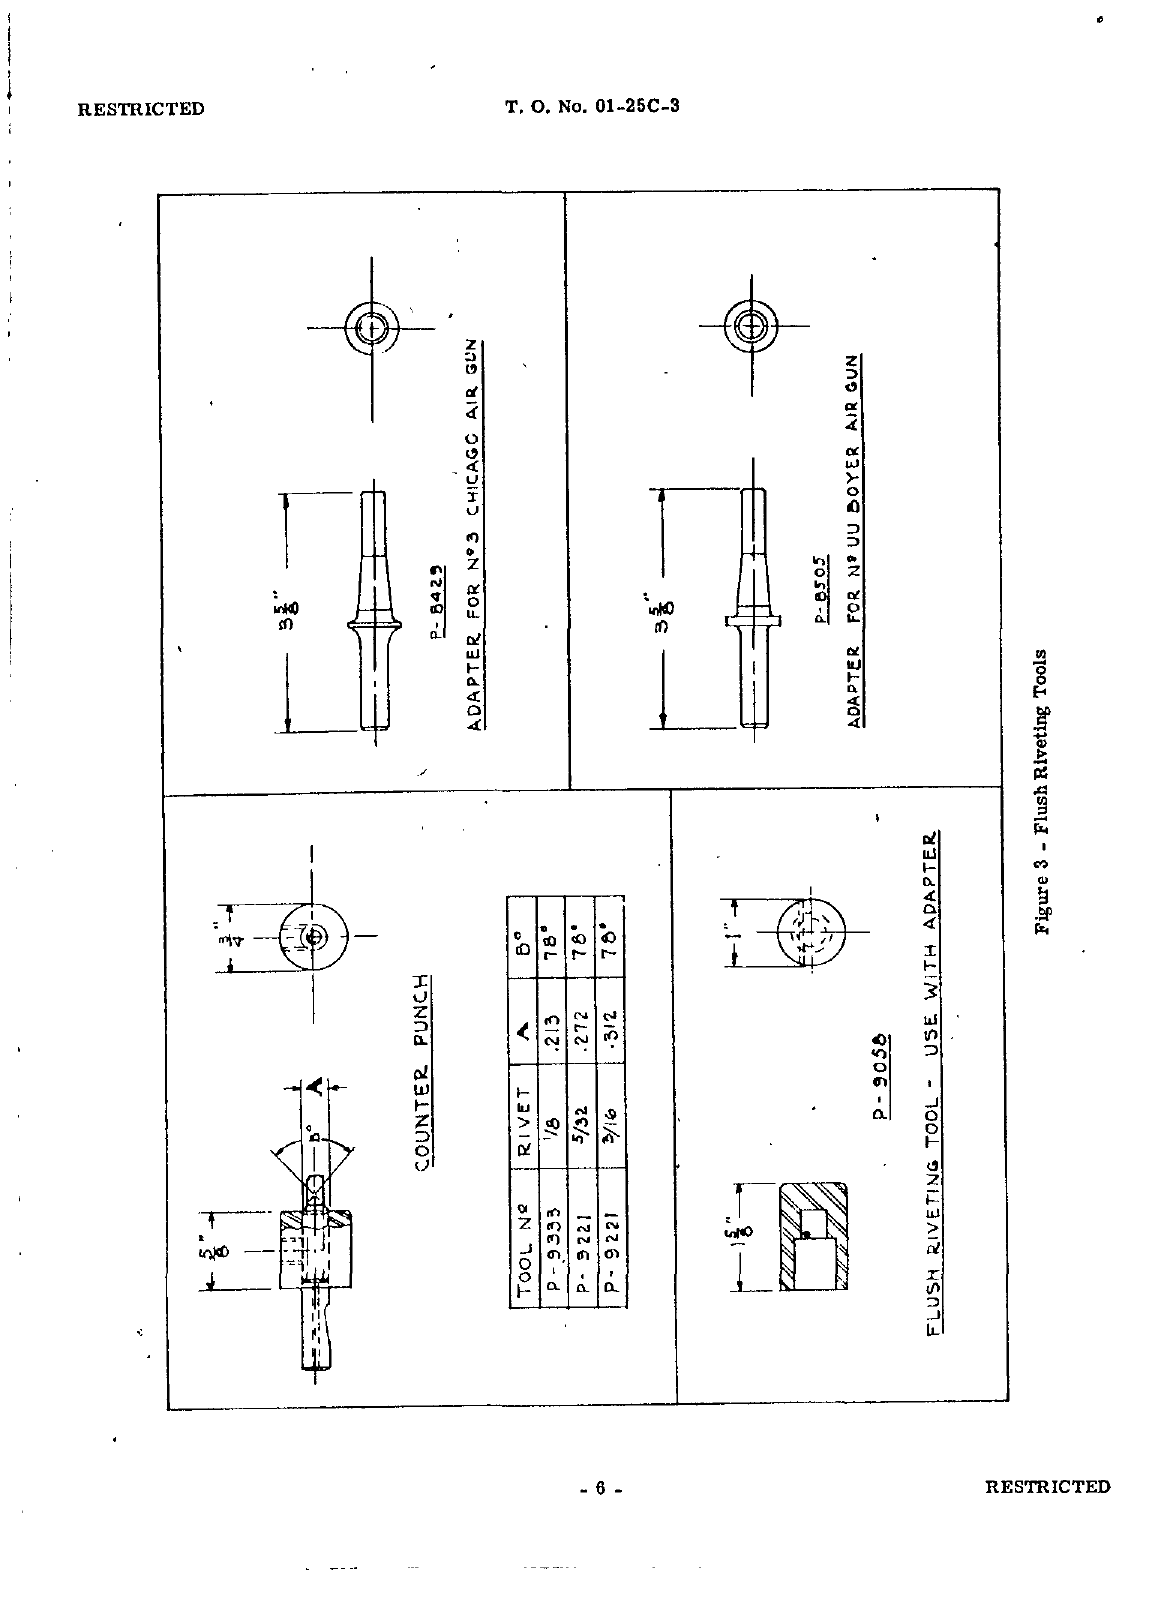 Sample page 9 from AirCorps Library document: Structural Repair Instructions for P-40D, P-40E, P-40E-1 and P-40F